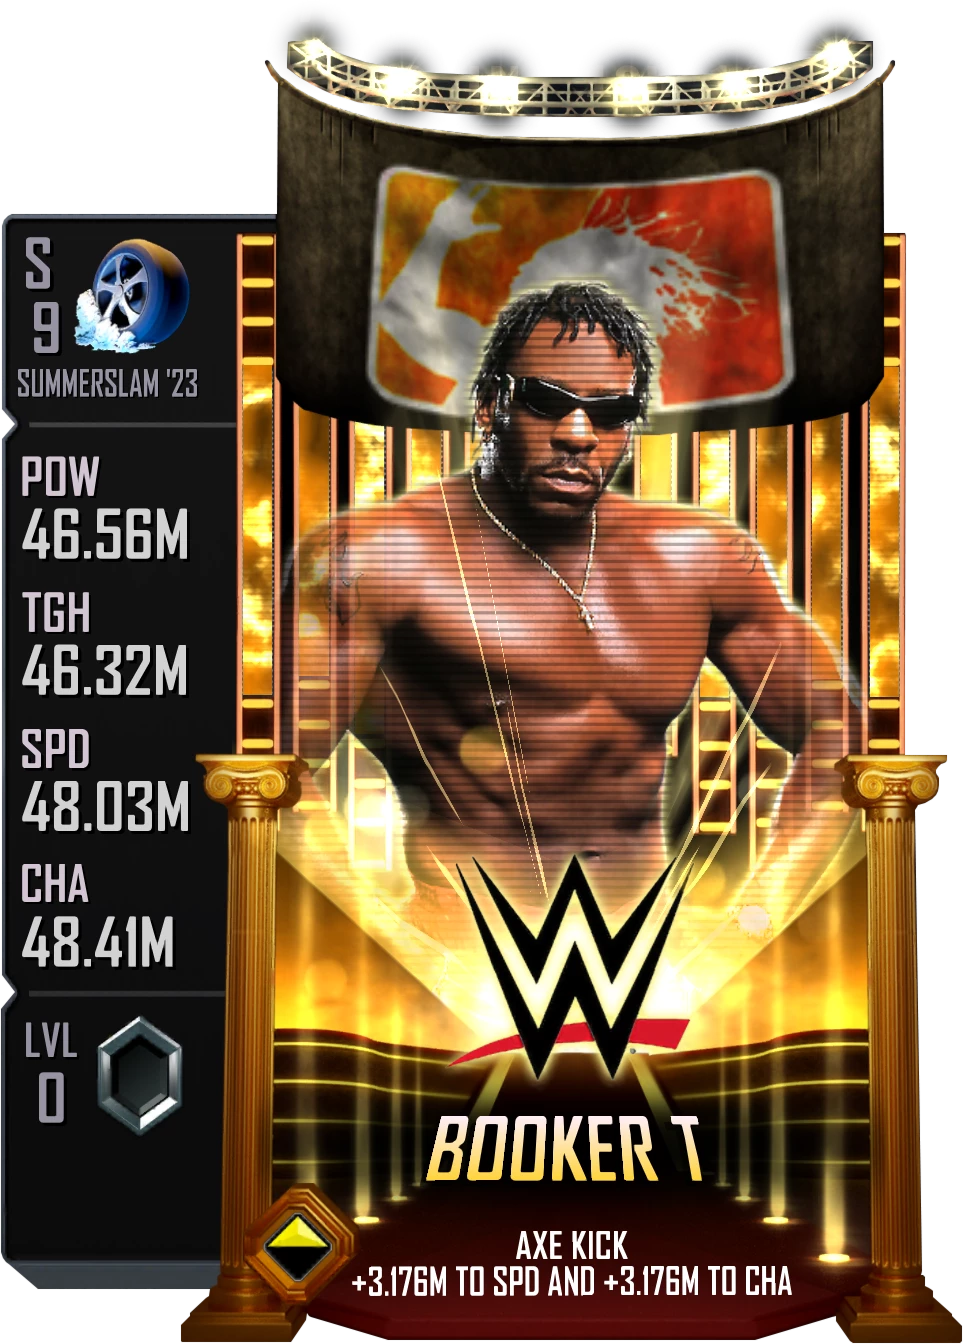 SS23 (SummerSlam '23) - Booker T SE (Special Edition) Card from WWE Supercard